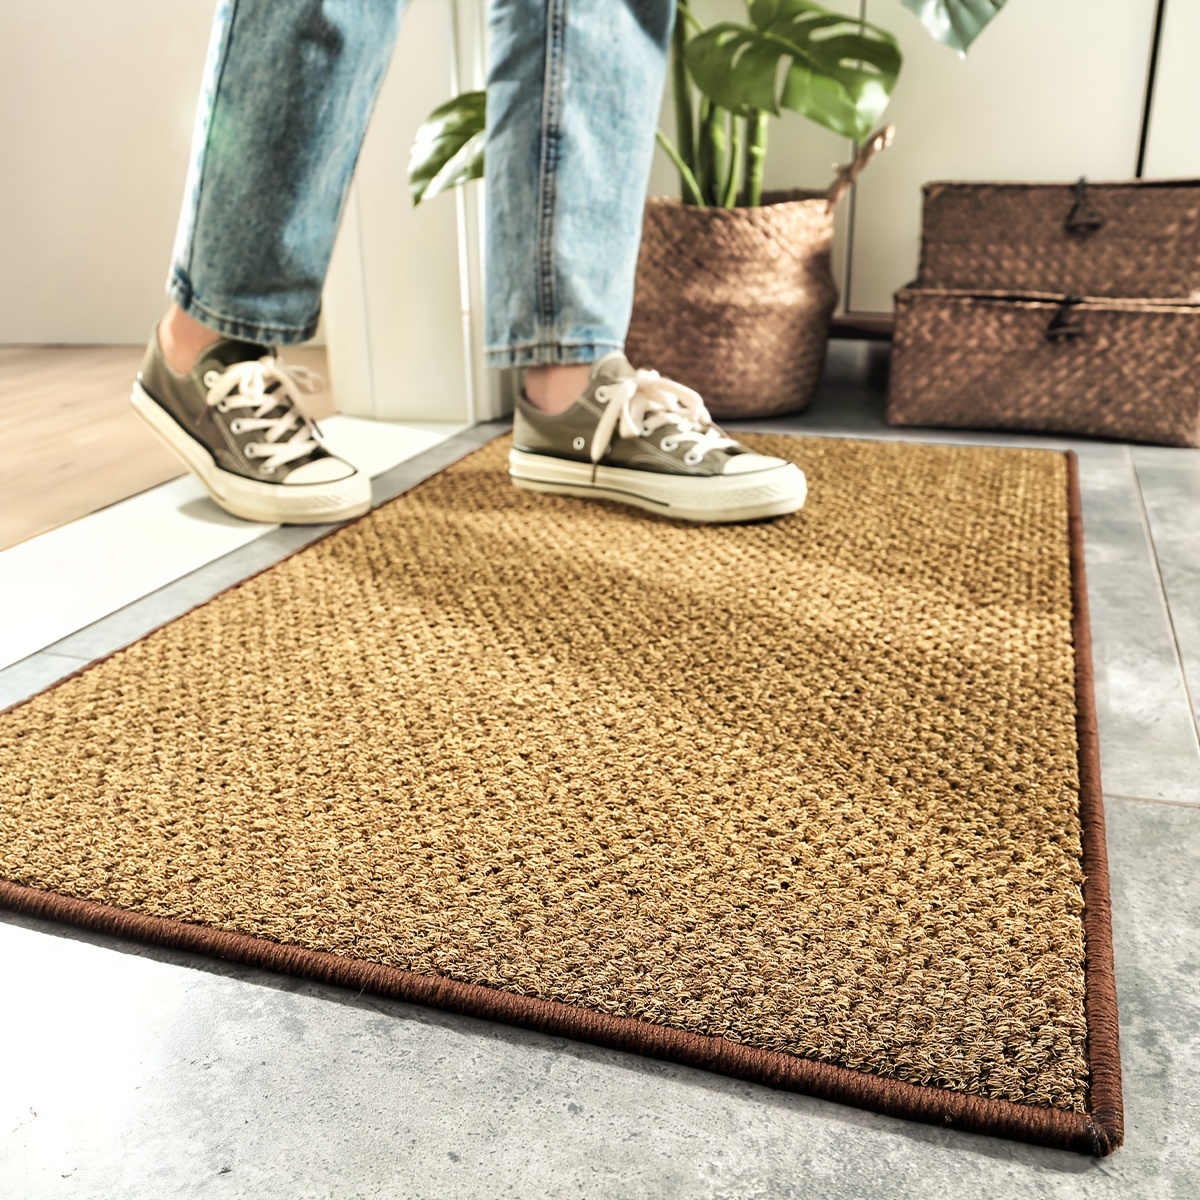 Welcome to Our Home Back Door Mat Outdoor Entrance Customized Dog's Image  and Name Entryway Floor Coir Mat Carpet Front Porch Rug Farmhouse Home Rug